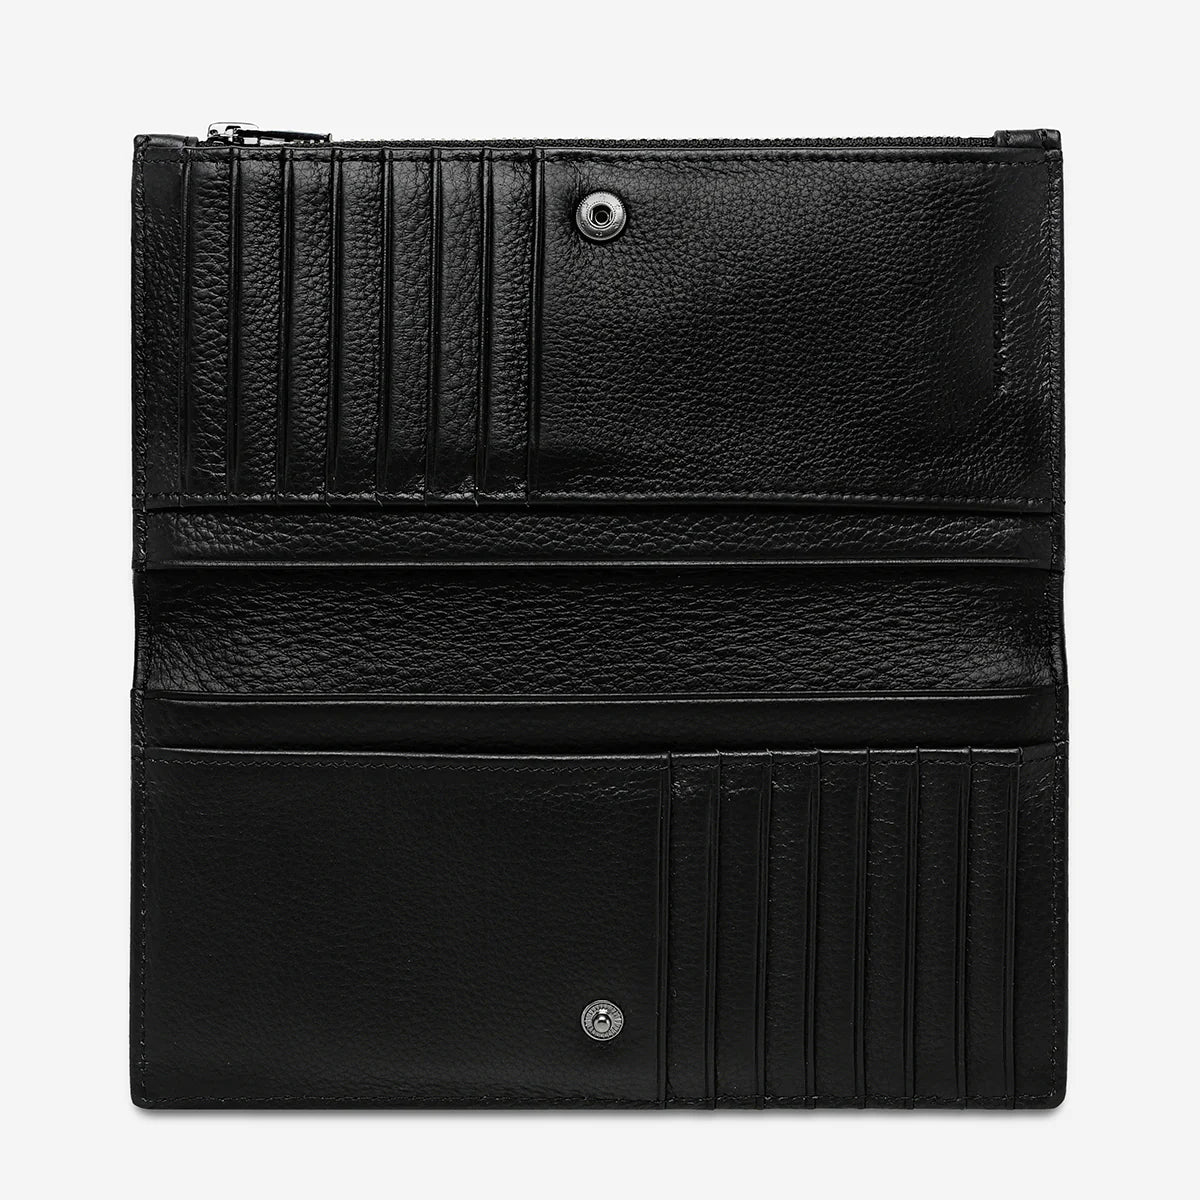 Status Anxiety Wallet Old Flame Black